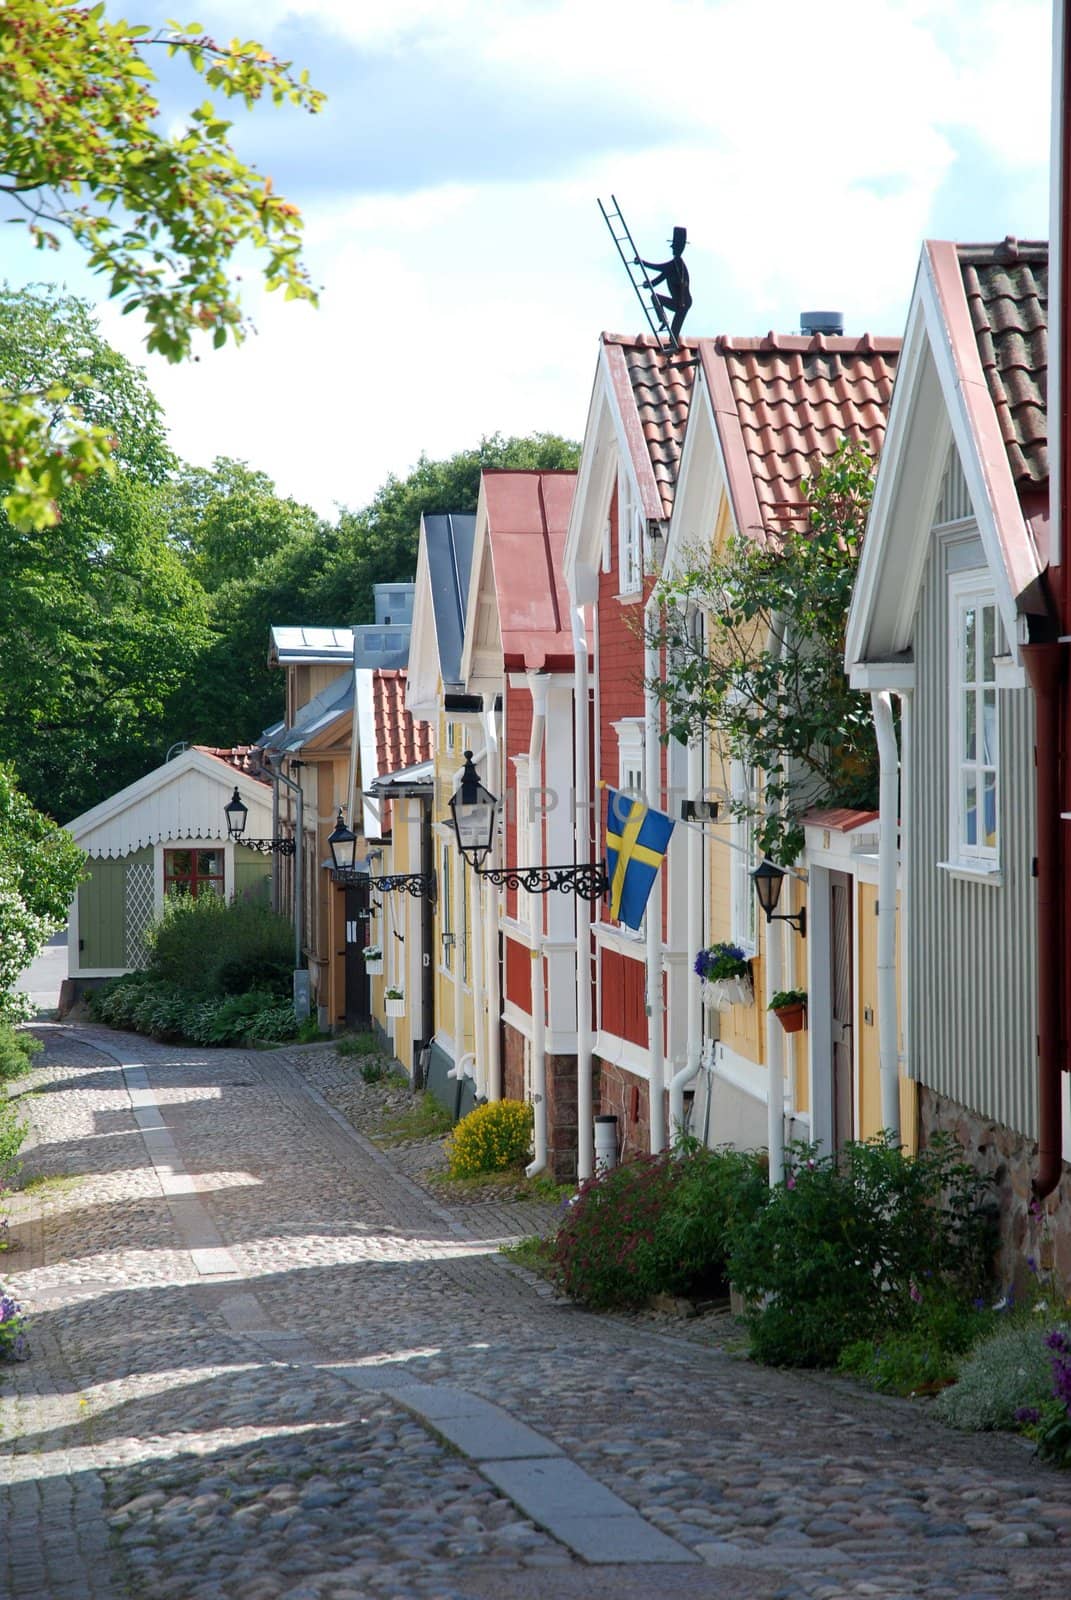 Cottages in a small town in Sweden